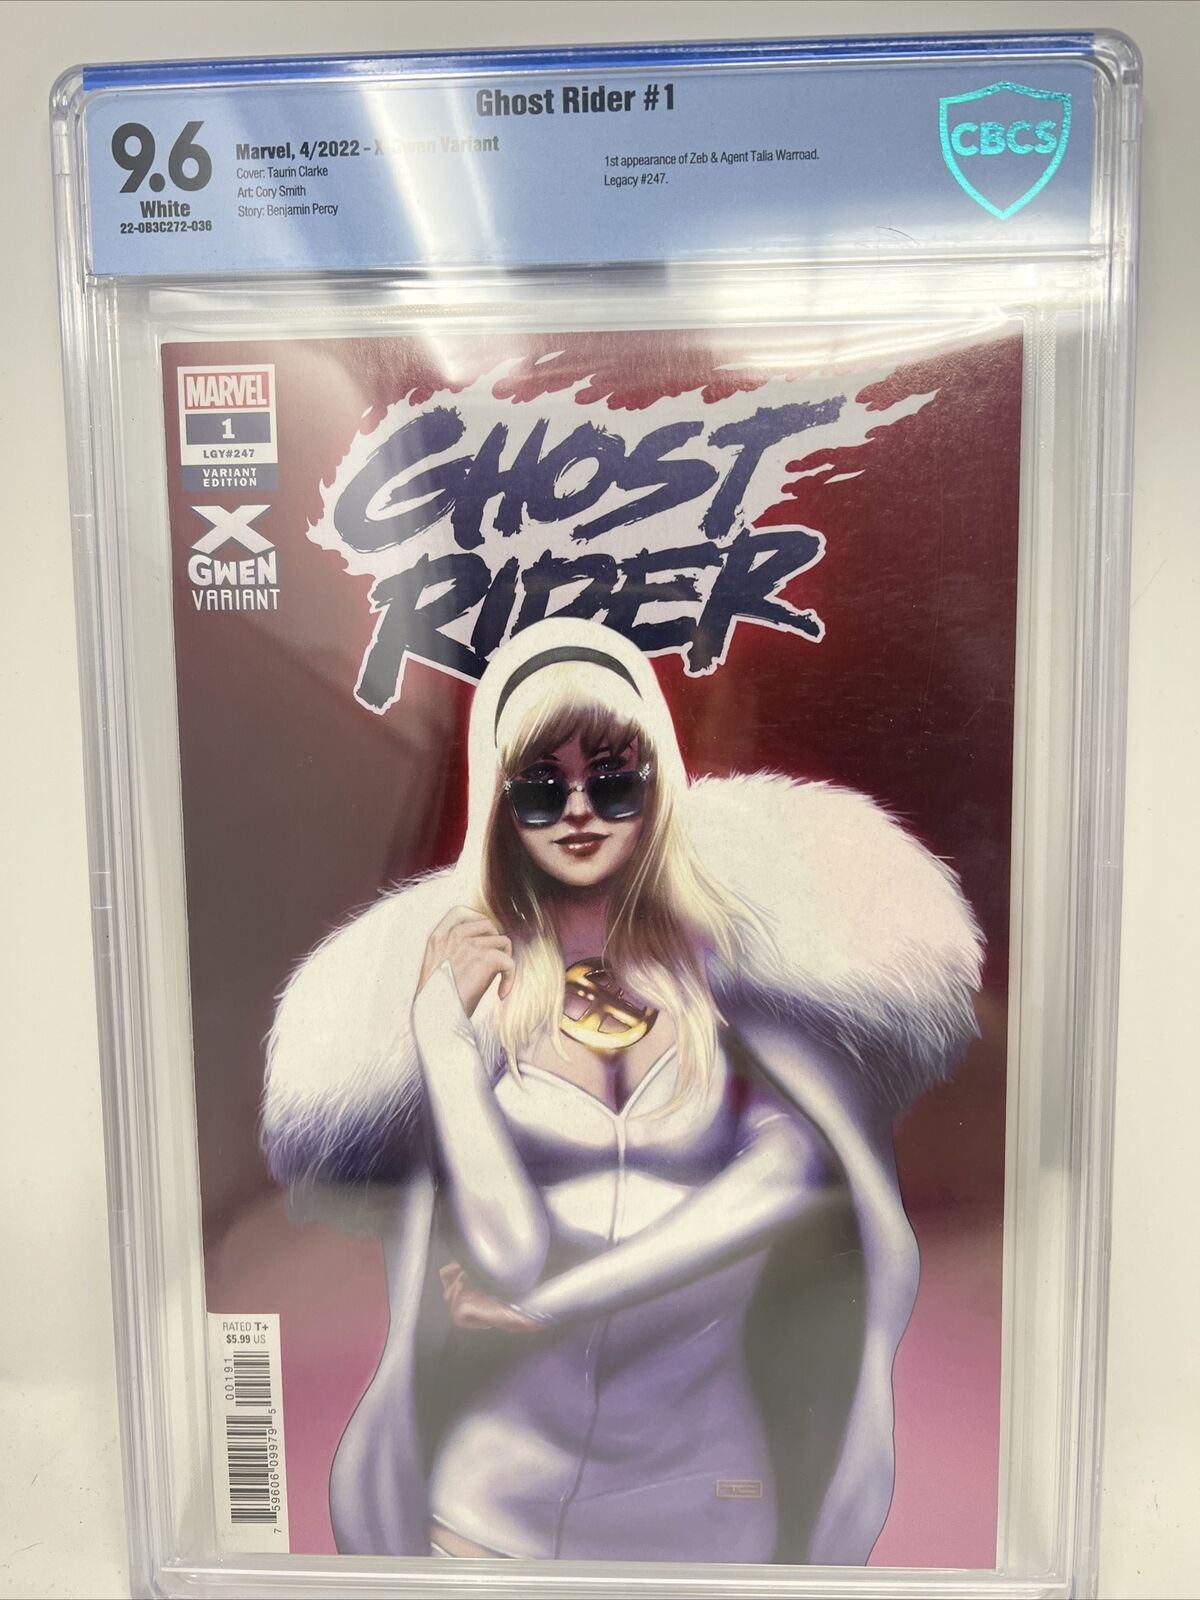 Marvel Comics GHOST RIDER #1 first printing X-Gwen variant CBCS 9.6 GRADED